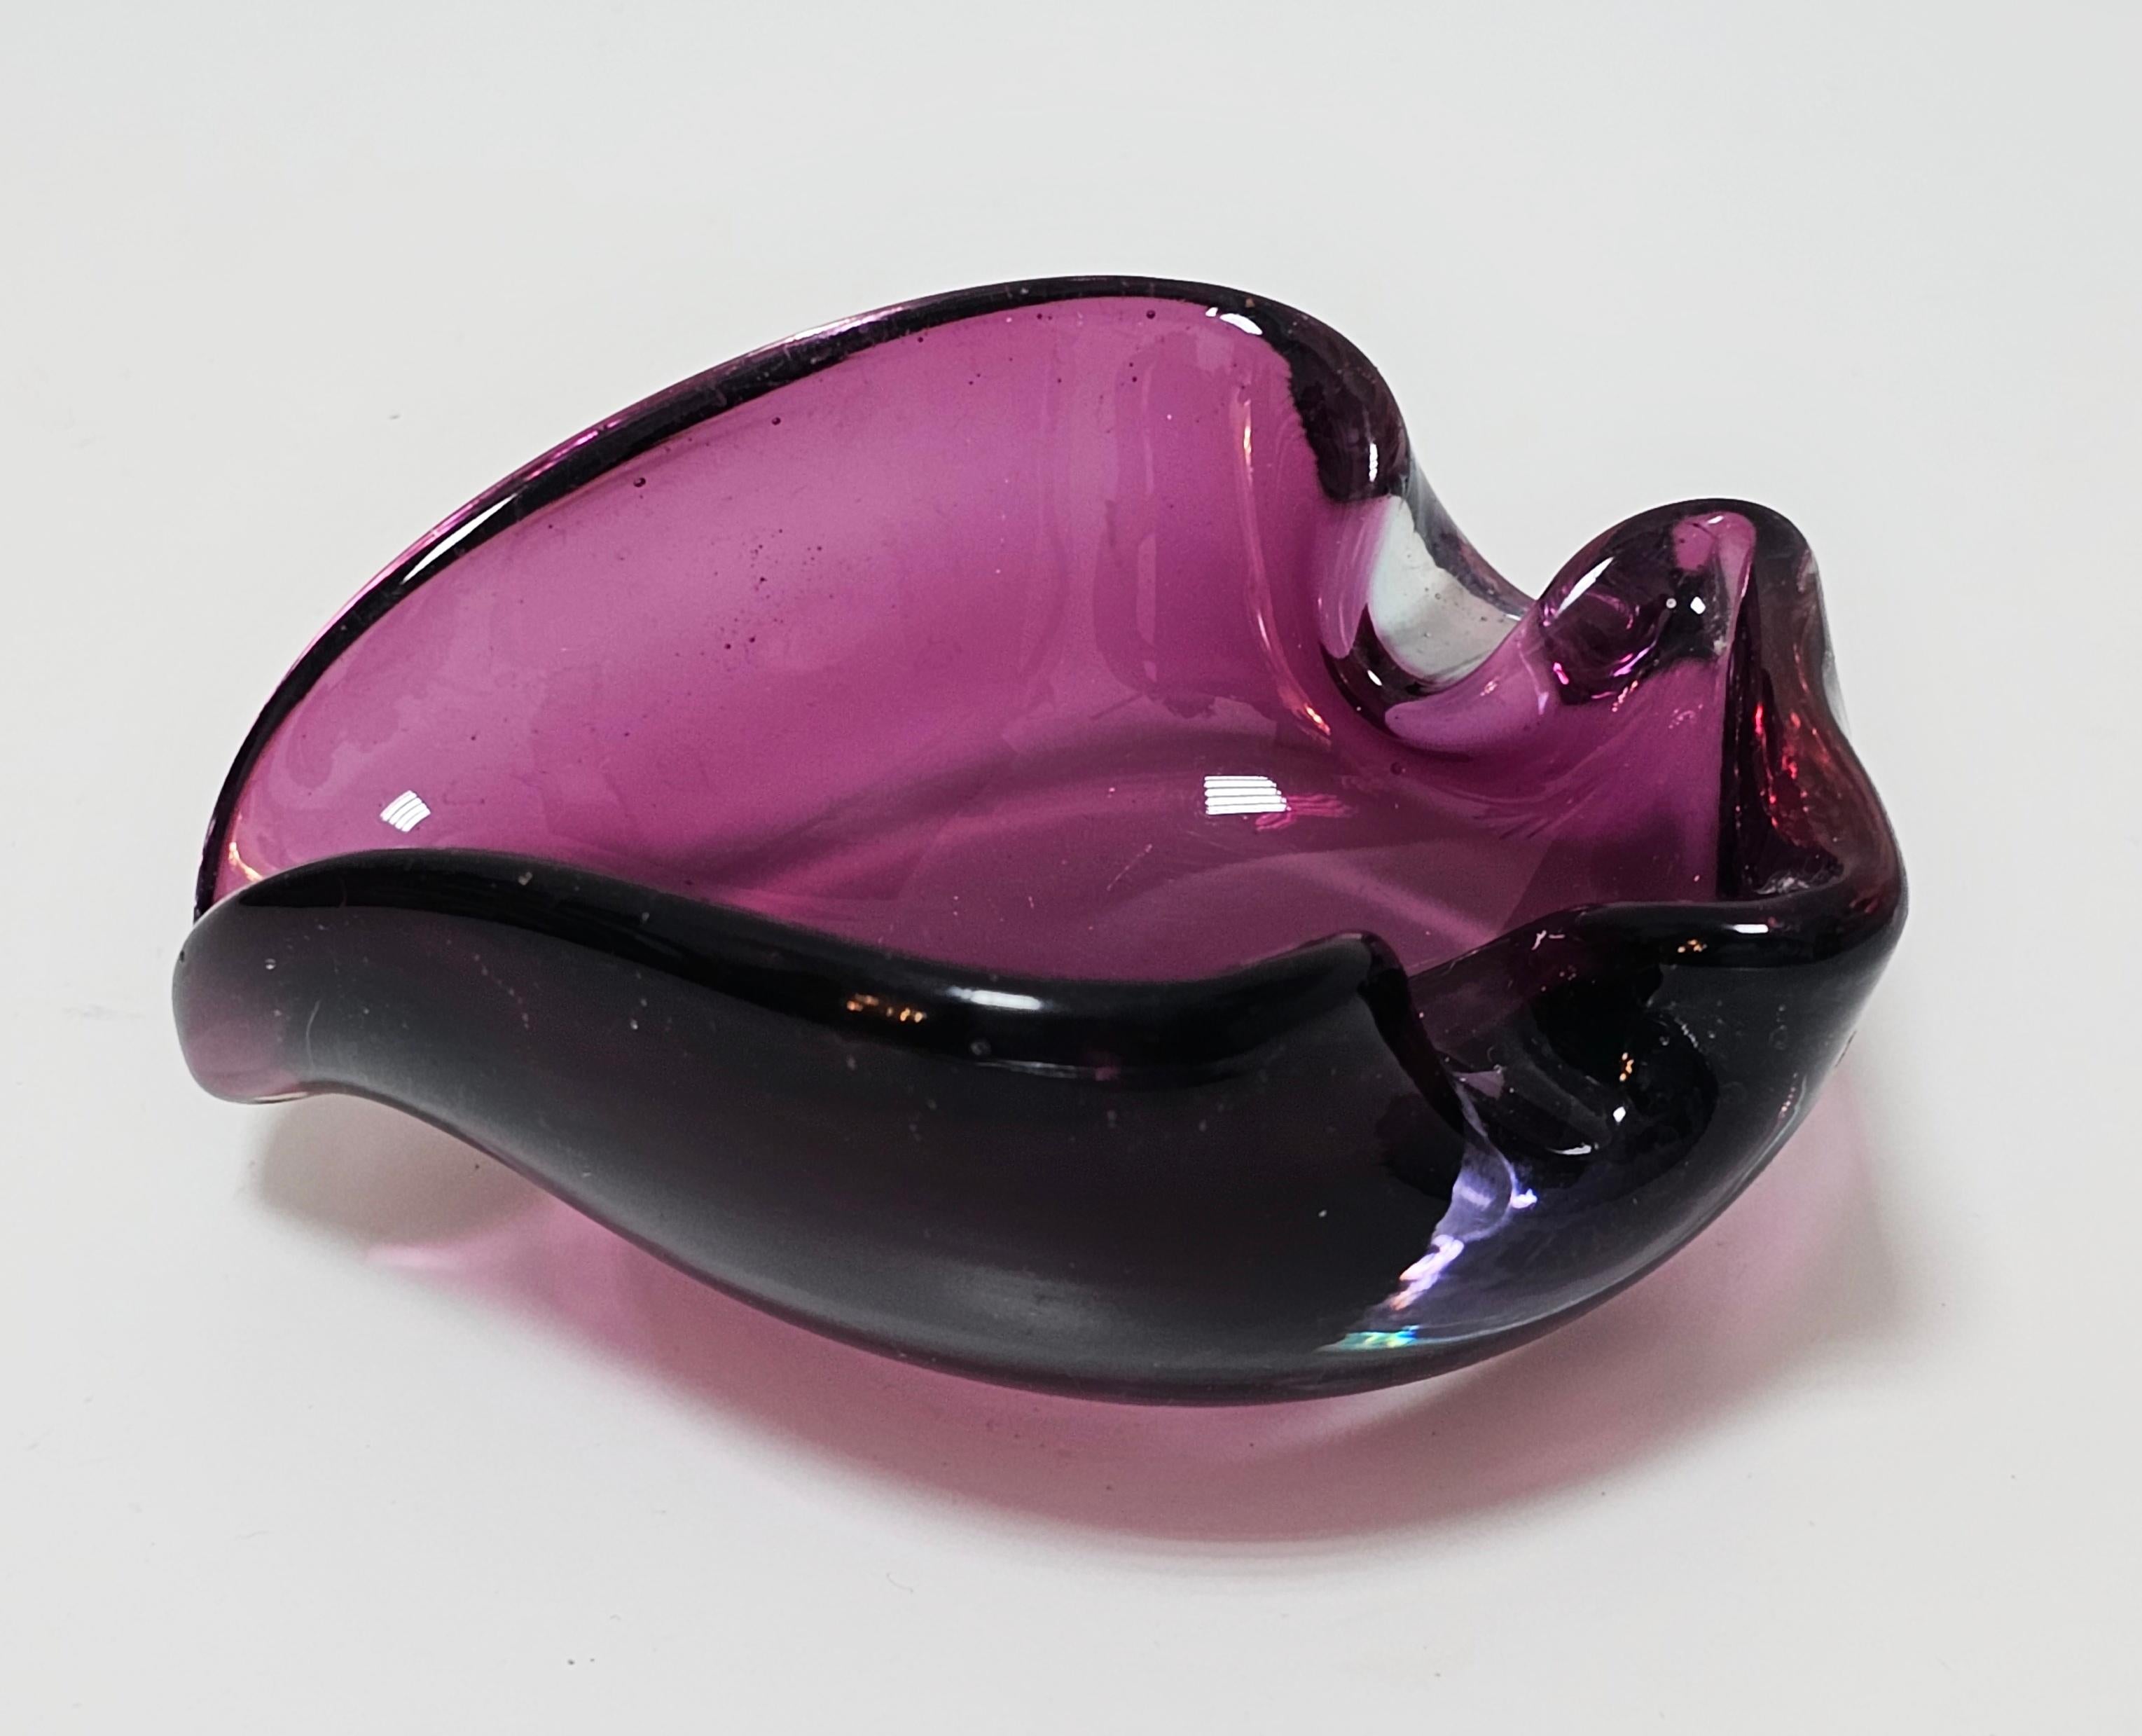 In this listing you will find a gorgeous Mid Century Modern Purple Murano glass ashtray, done in style of Alfredo Barbini. It features beautiful shape with two rests for the cigarettes. Made in Murano in 1960s.

Excellent vintage condition. No